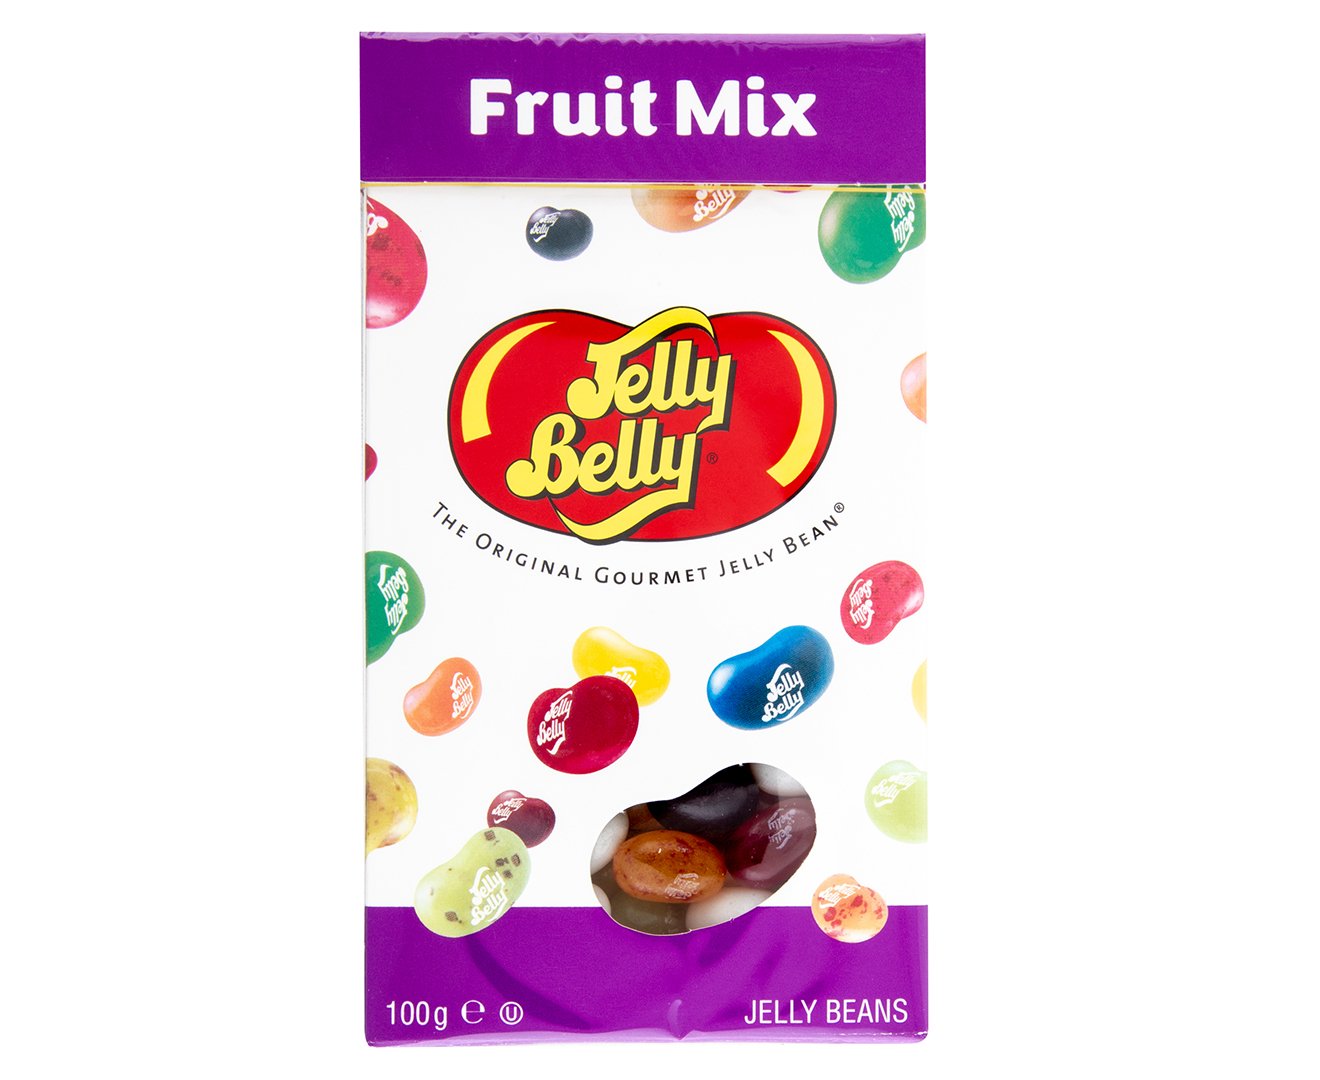 Jelly se. Джелли Белли под. Jelly belly Sours 35 гр. Jelly belly 20 flavors 100g. Jelly belly Fruit Mix.